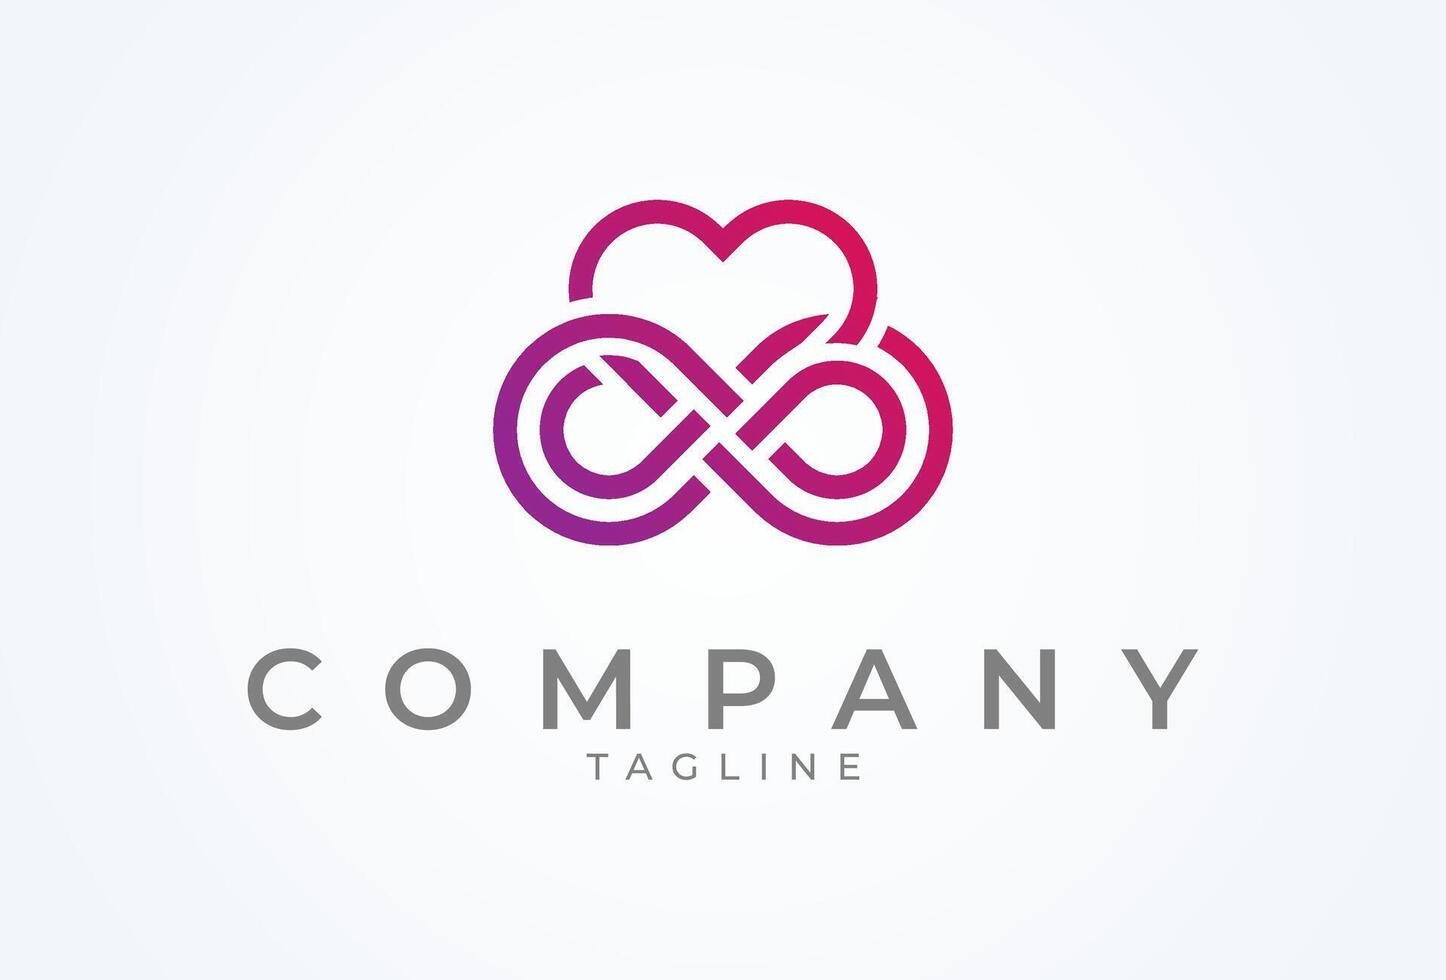 Infinity Heart logo, Heart with infinity combination, flat design logo template element, illustration vector